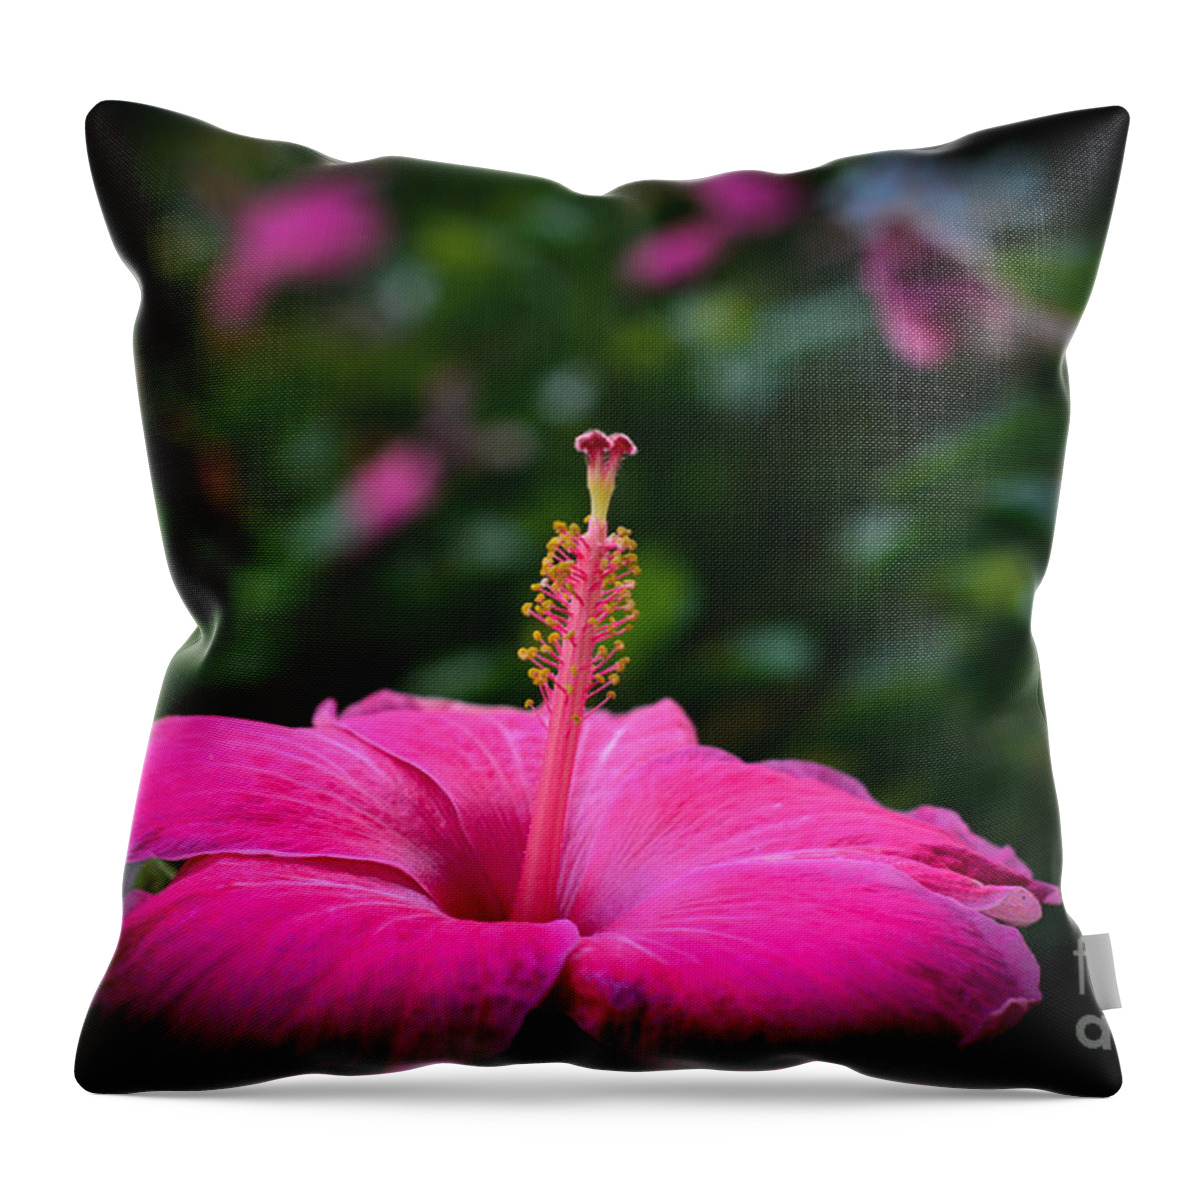 Photograph Throw Pillow featuring the photograph Pink Romance by Kelly Wade